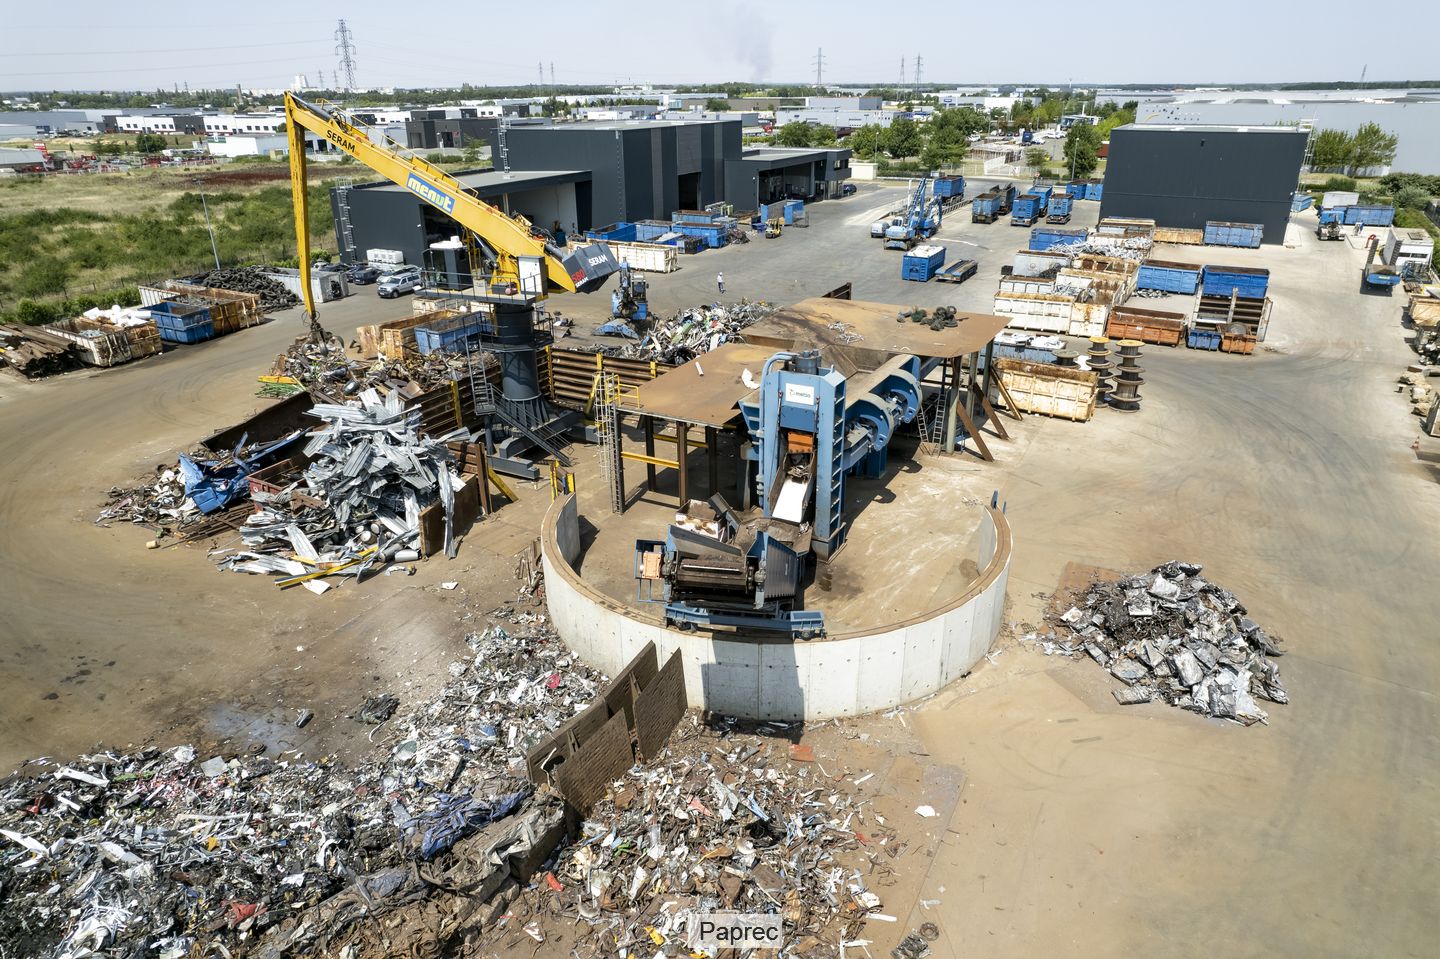 Menut's Gellainville scrap recycling yard acquired by Paprec